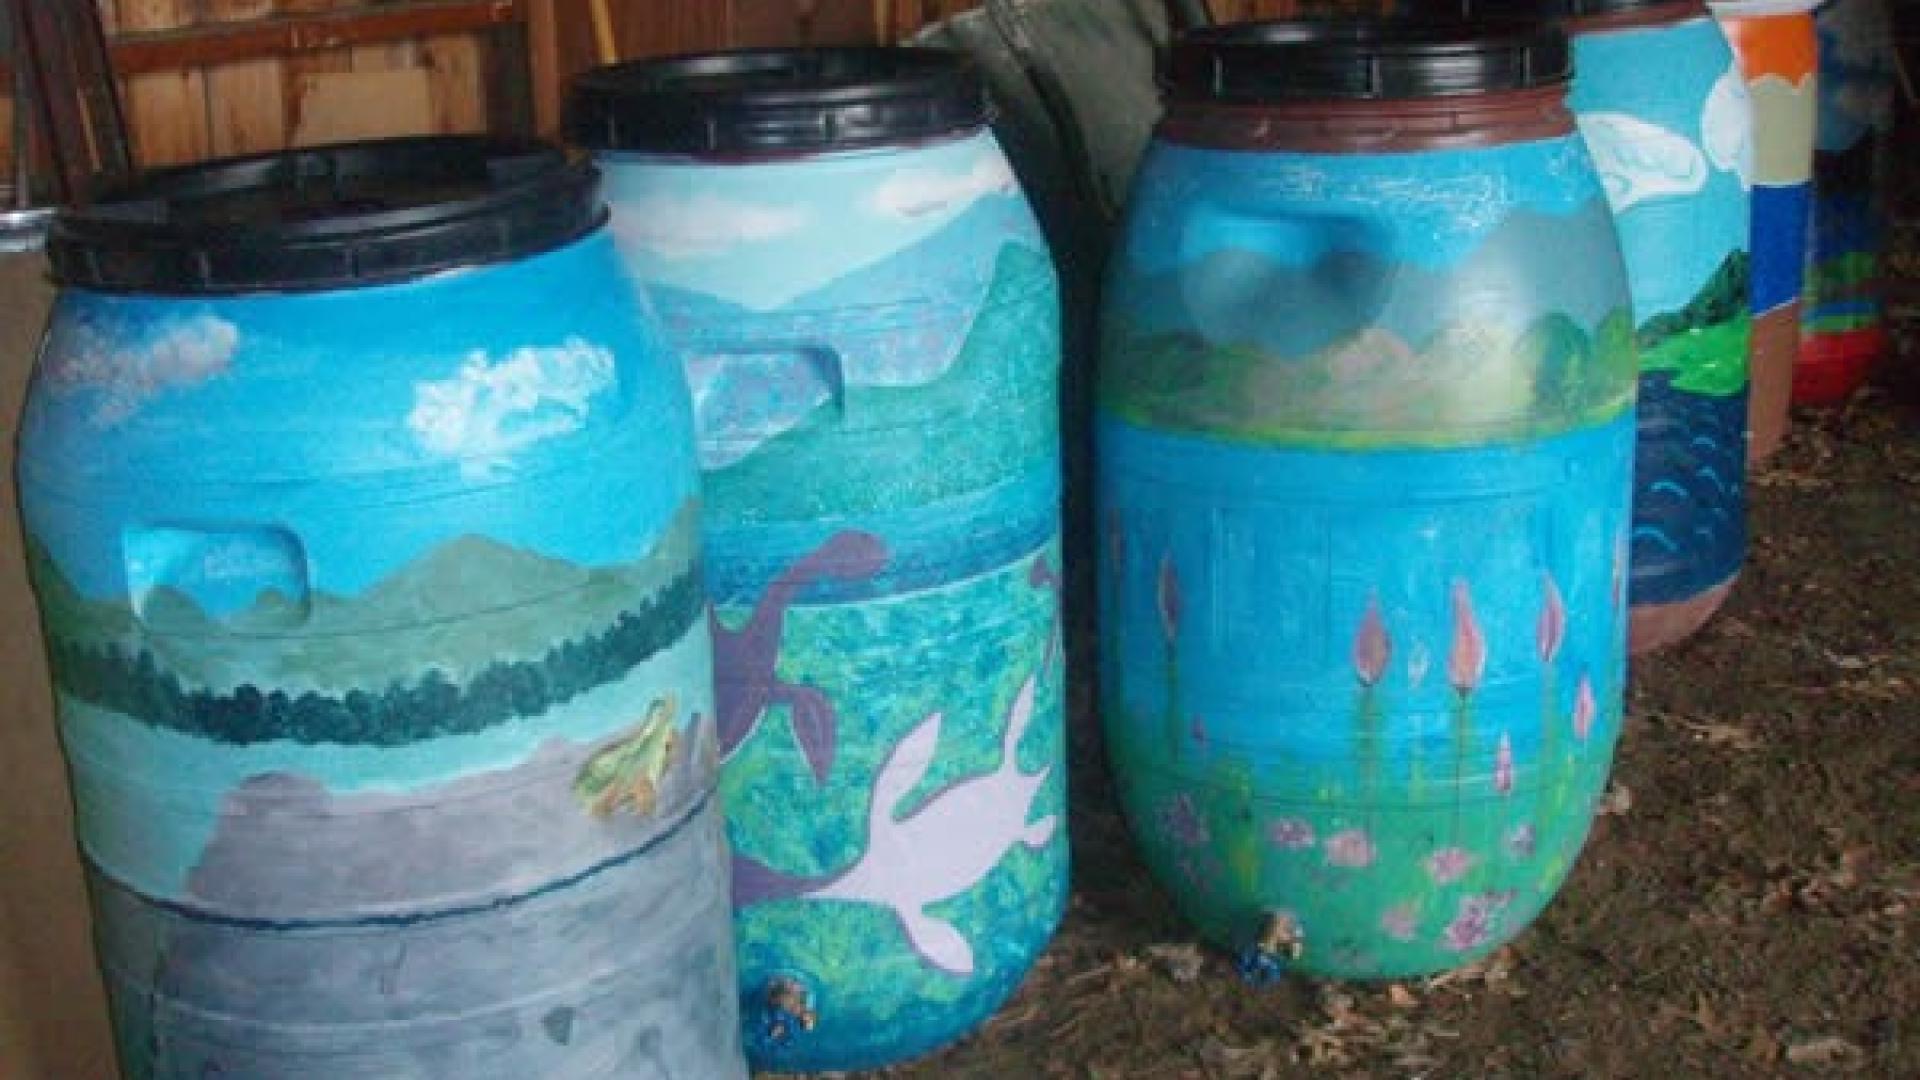 Rain barrels can hold water for later use that would otherwise end up as runoff during a storm.